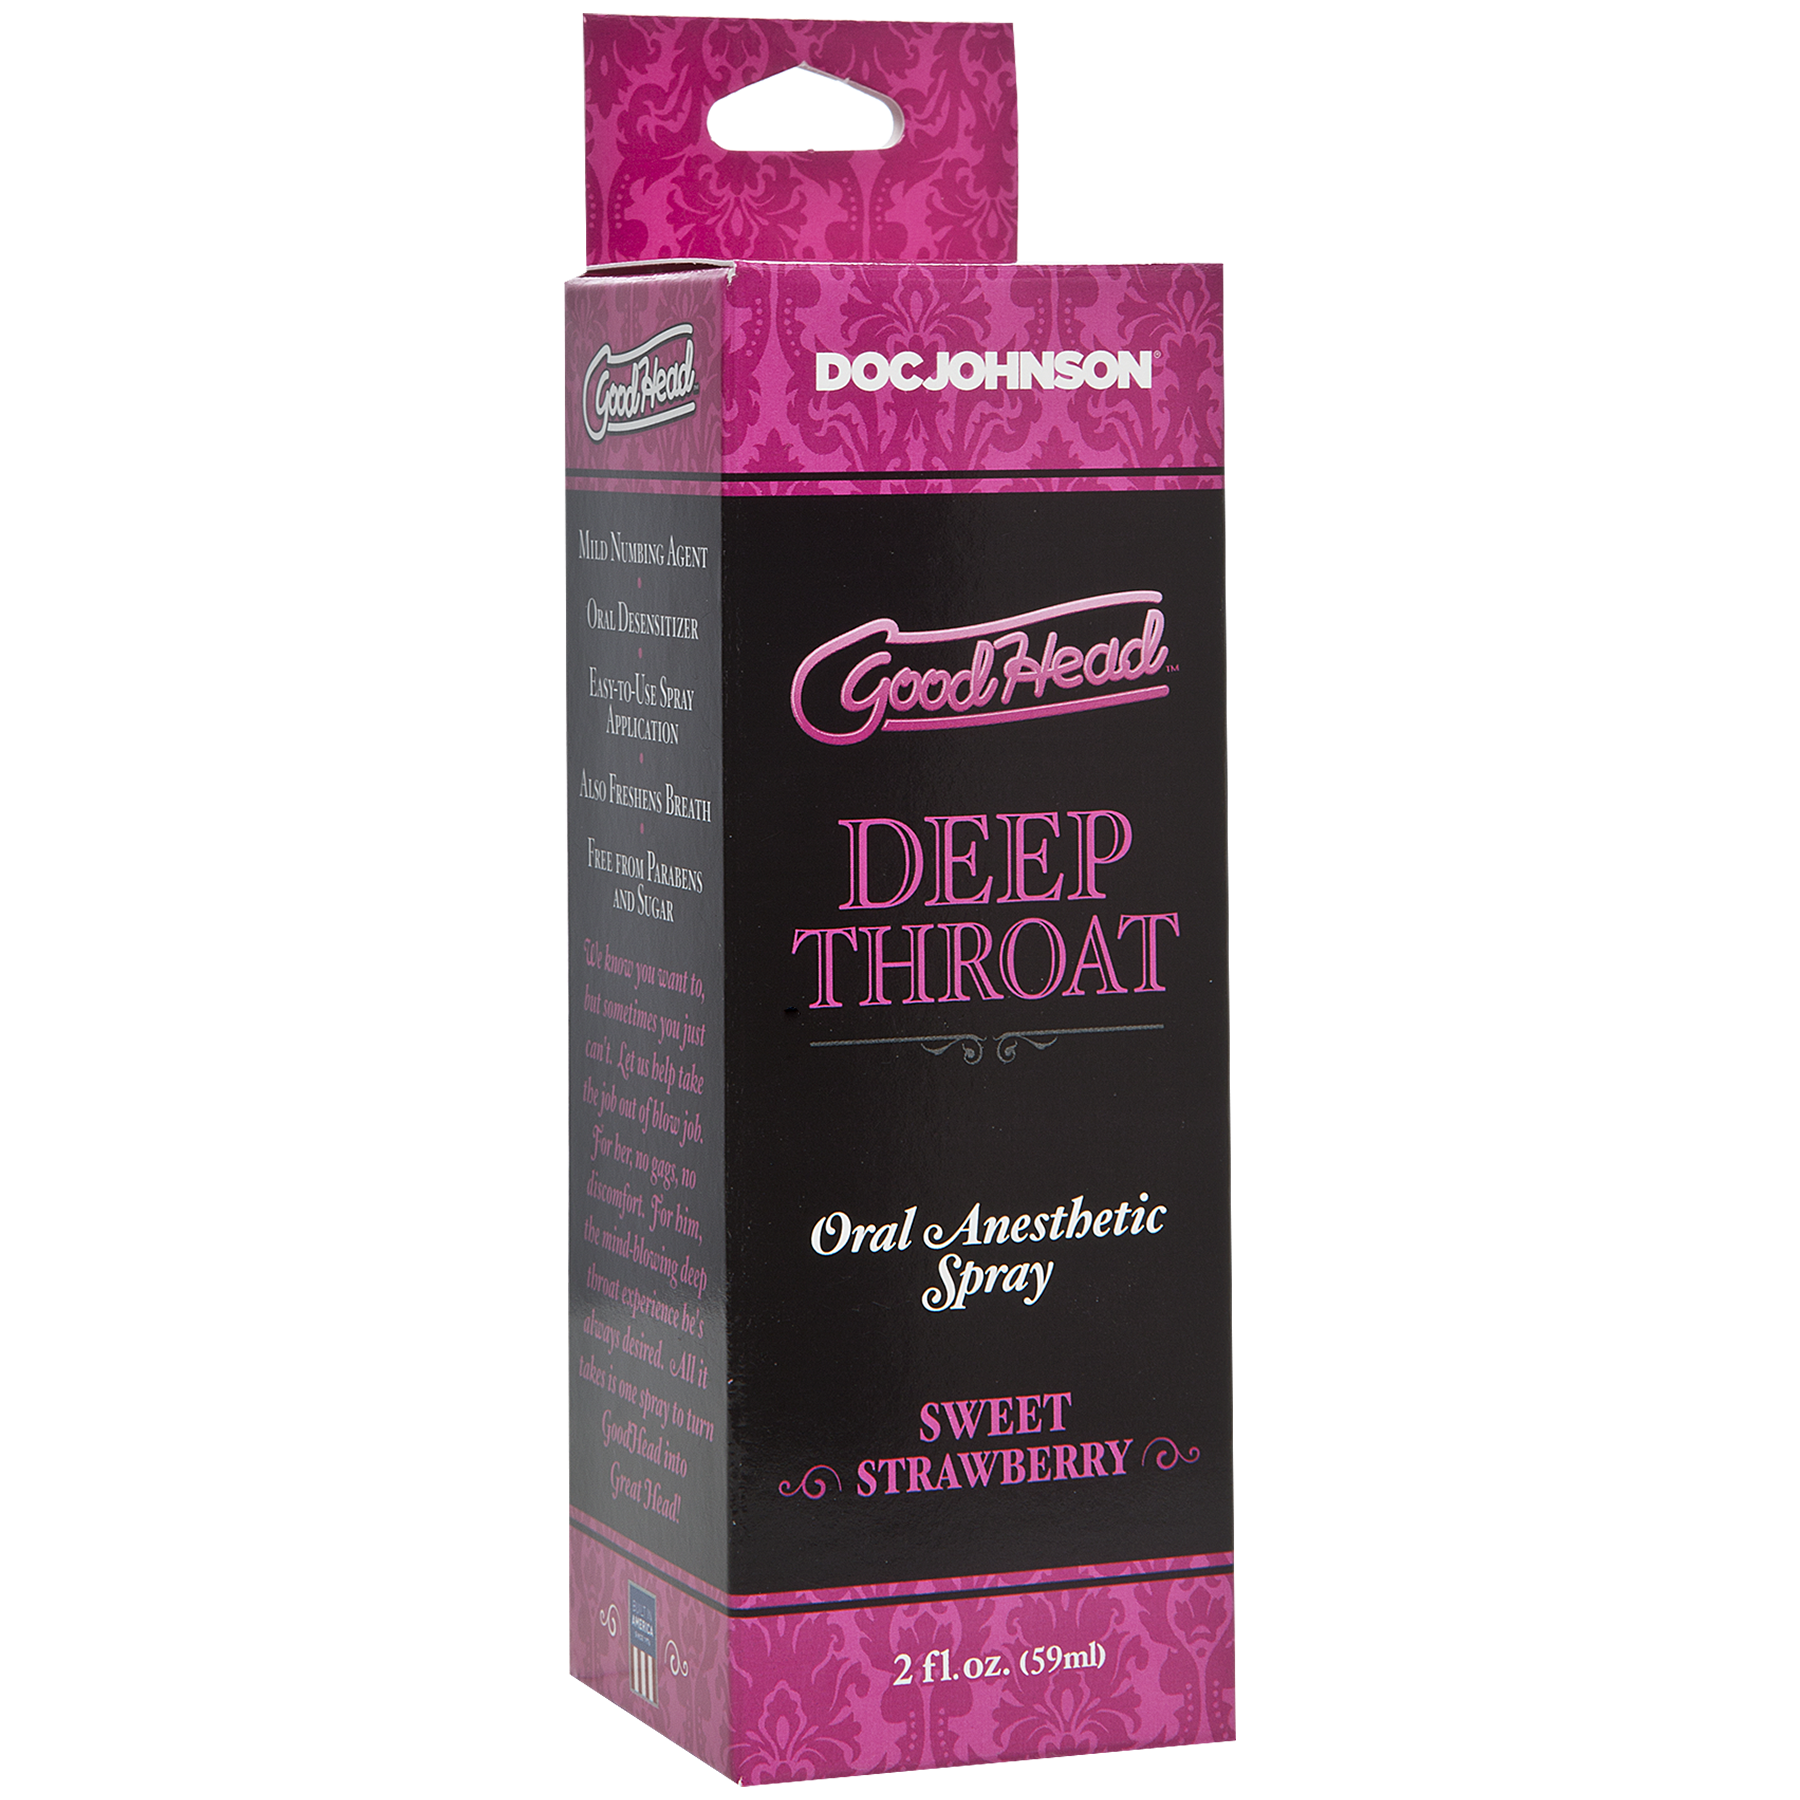 Deep Throat Oral Anesthetic Spray 2oz in its box (strawberry).